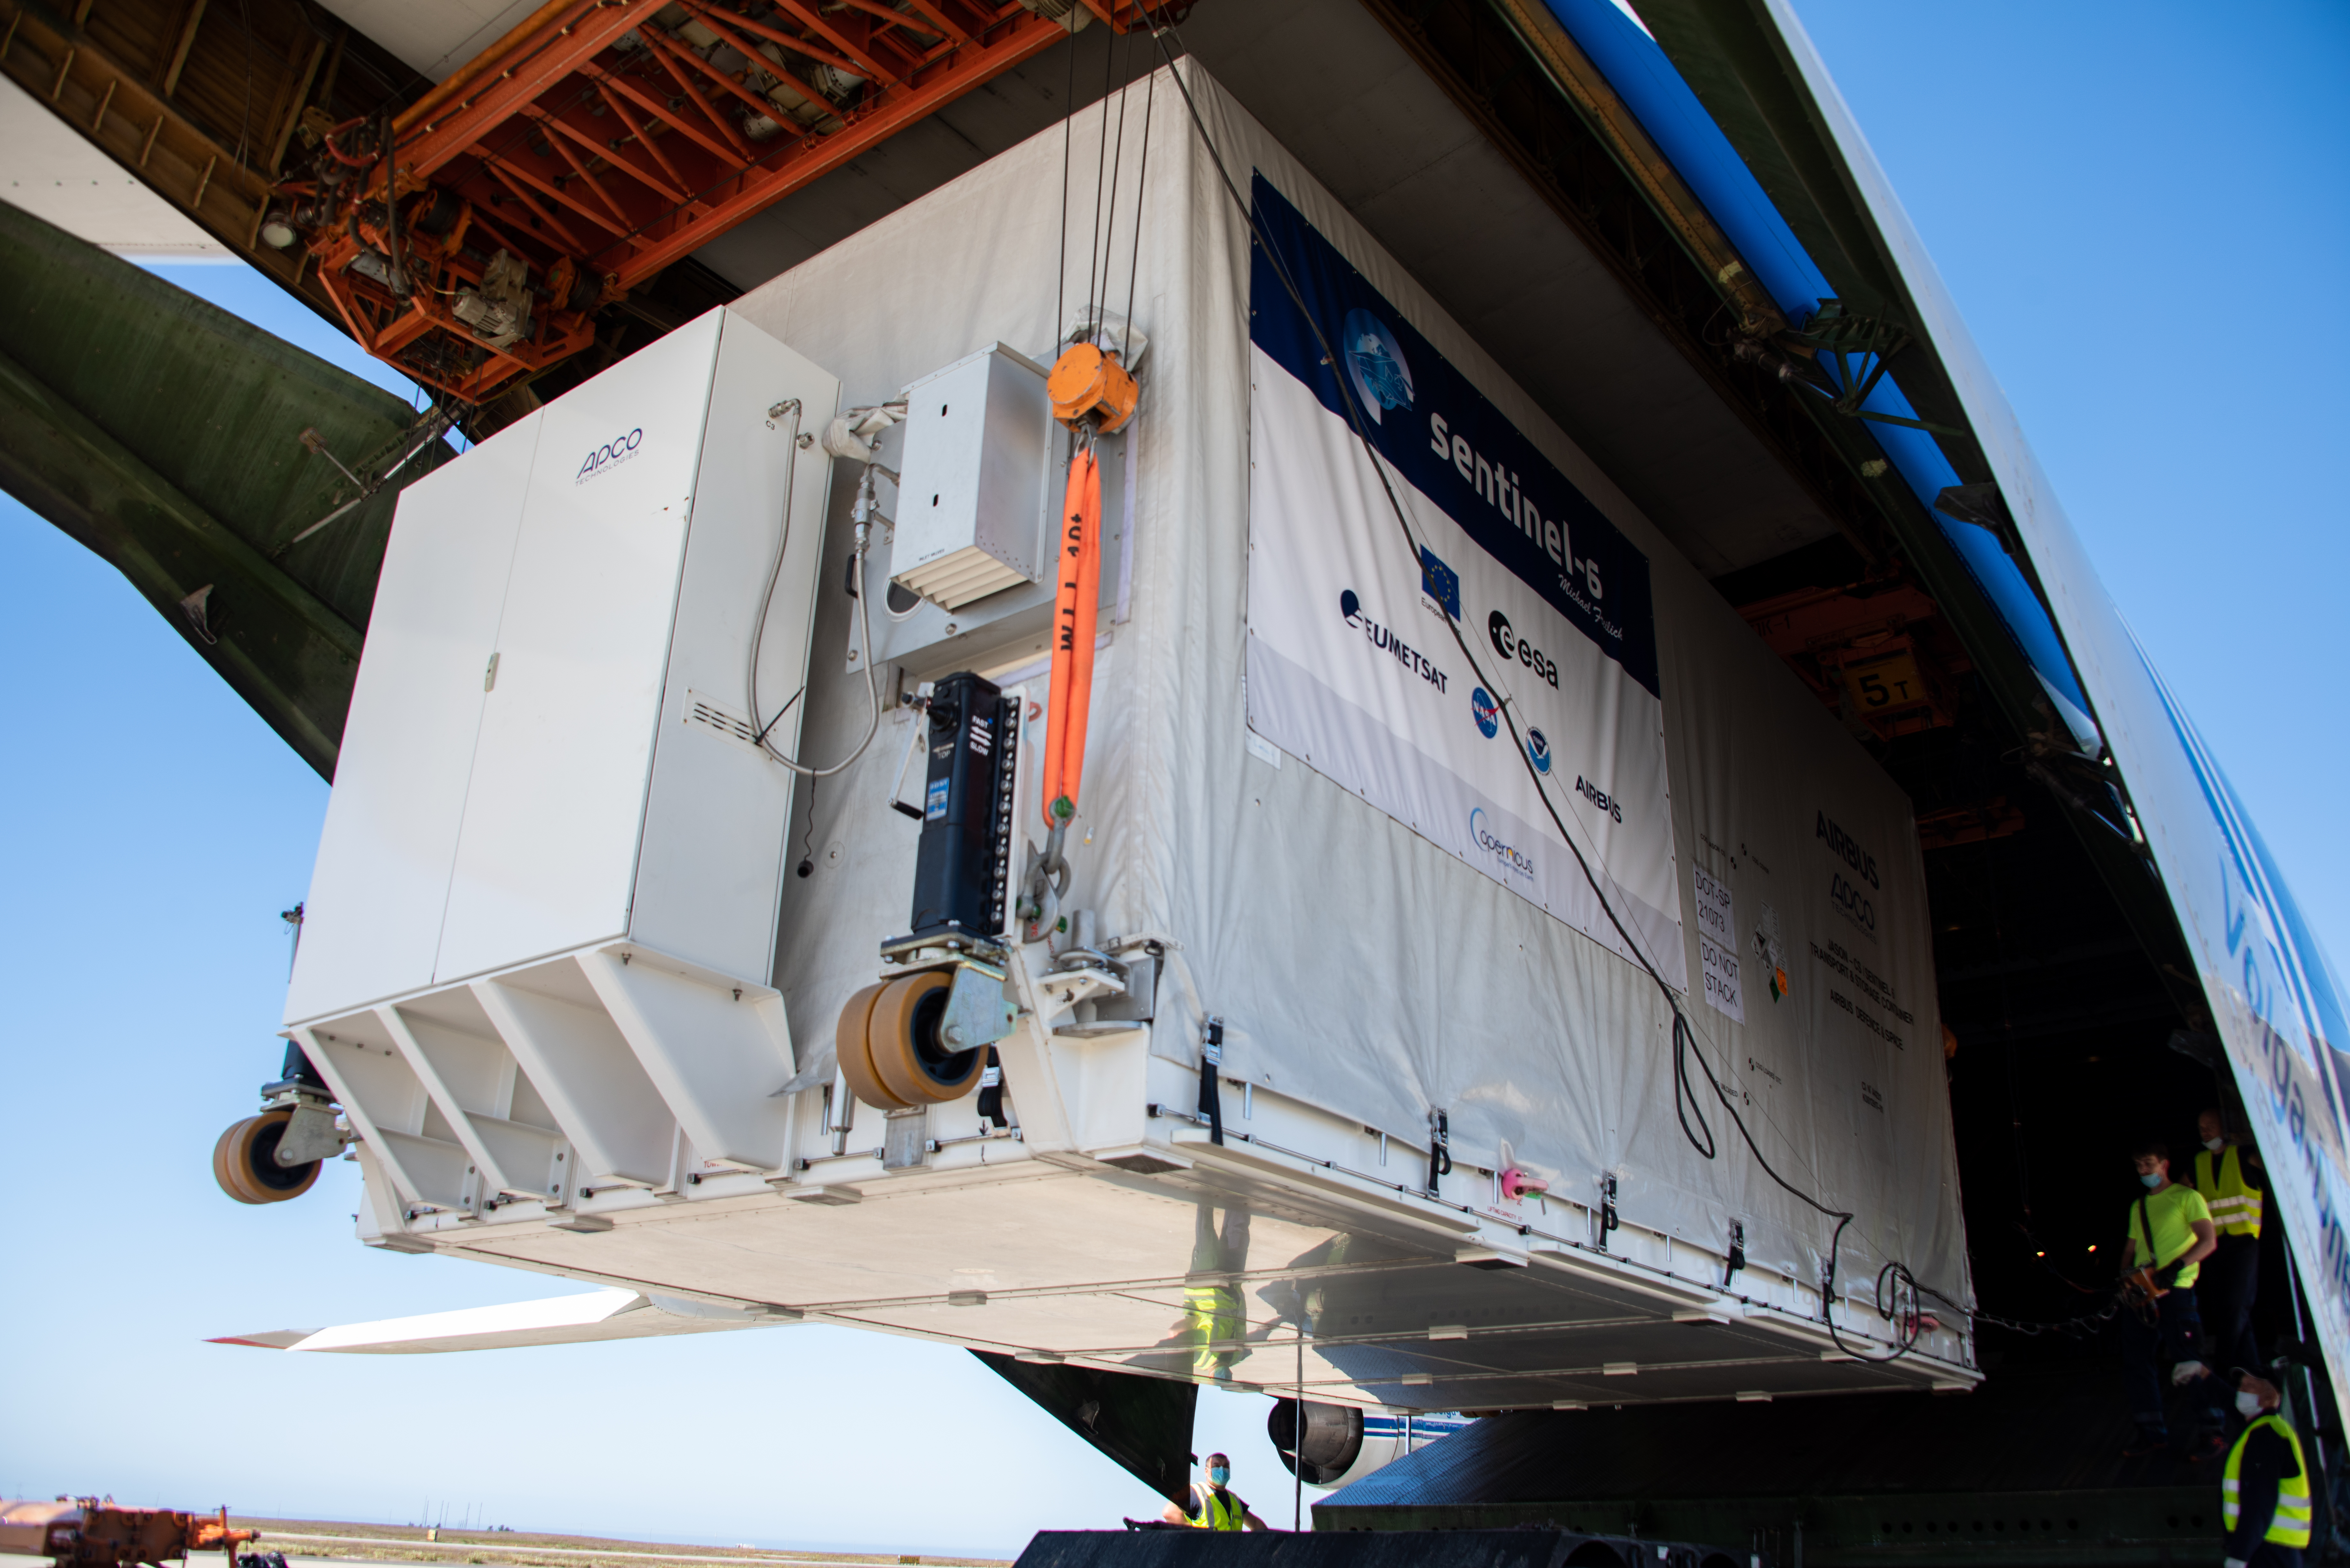 A photo of the spacecraft in its container being lifted out of the plane.